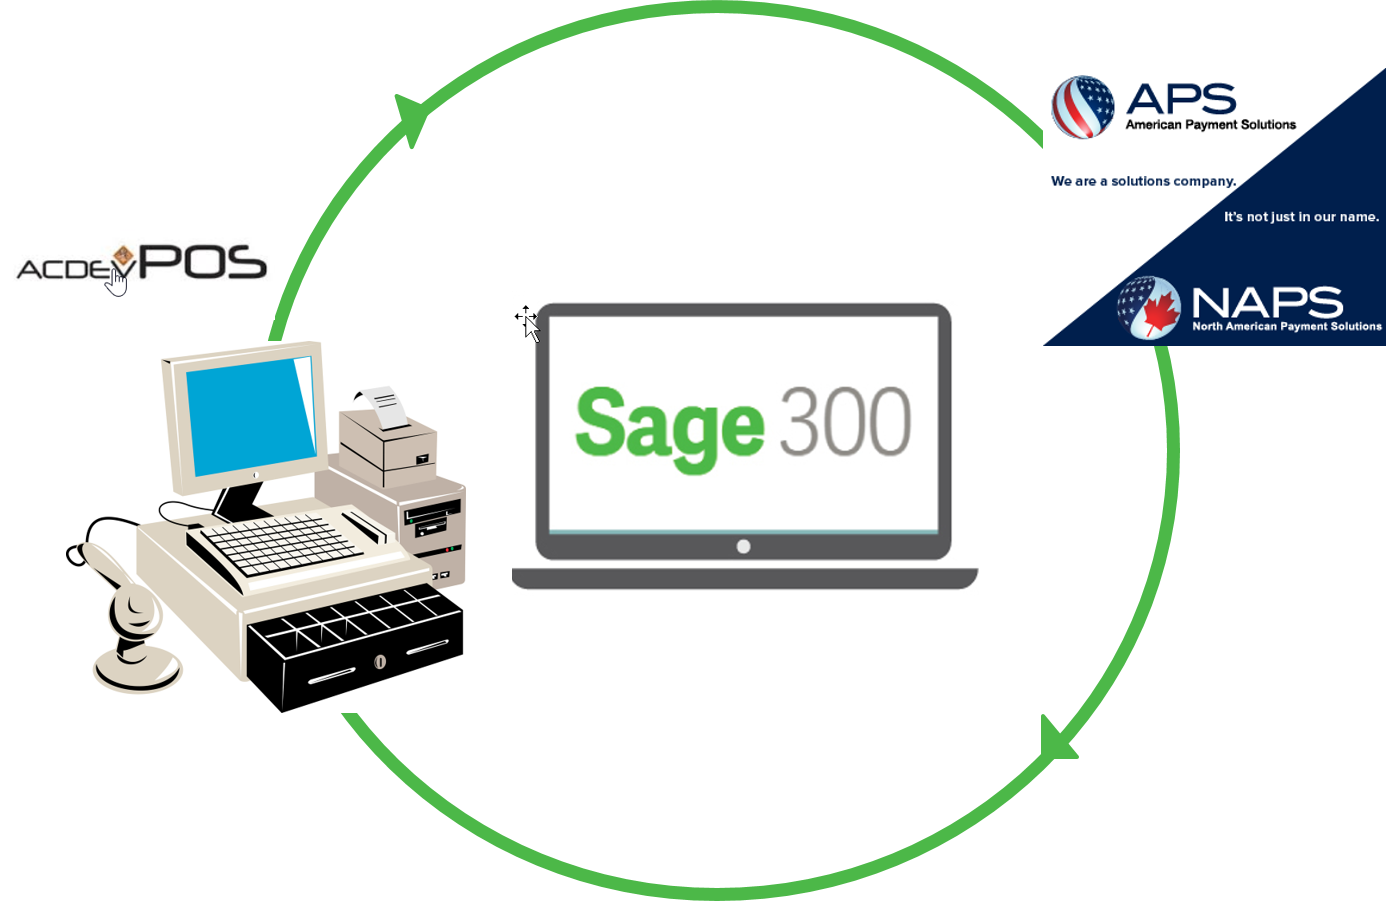 Sage 300: Learn How Sales are Made Easy with ACDEV POS while Achieving the Lowest Rates with Integrated Credit Card Processing